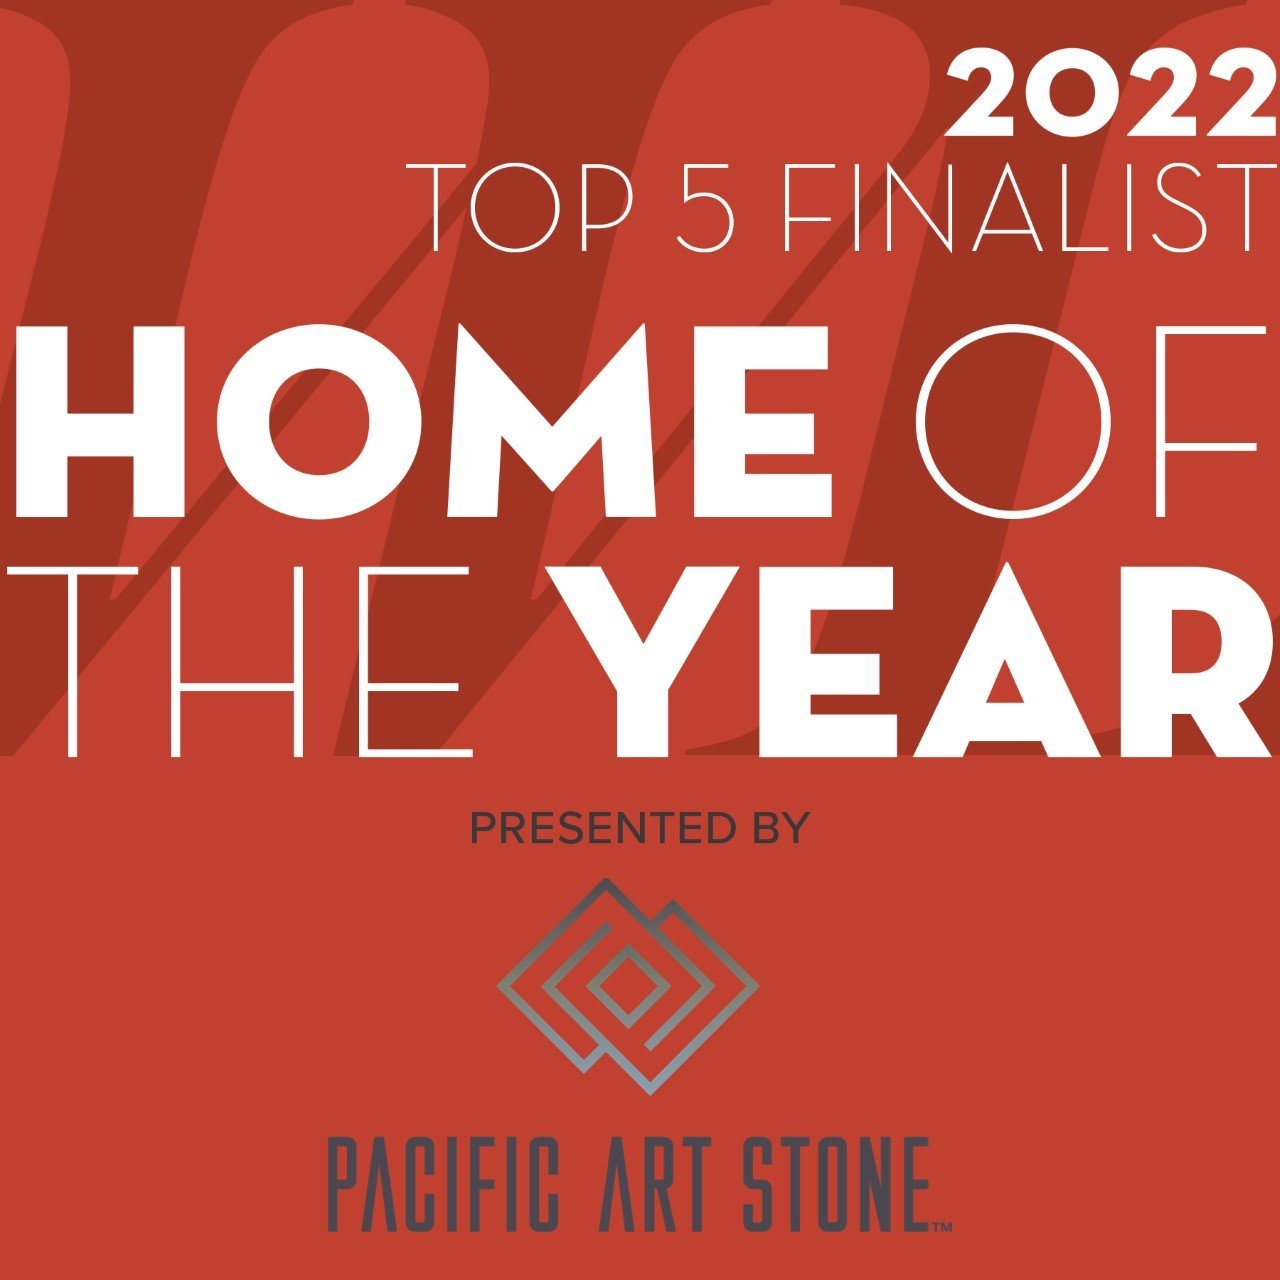 Home of the Year 2022__TOP 5 FINALIST Web Badge.jpeg